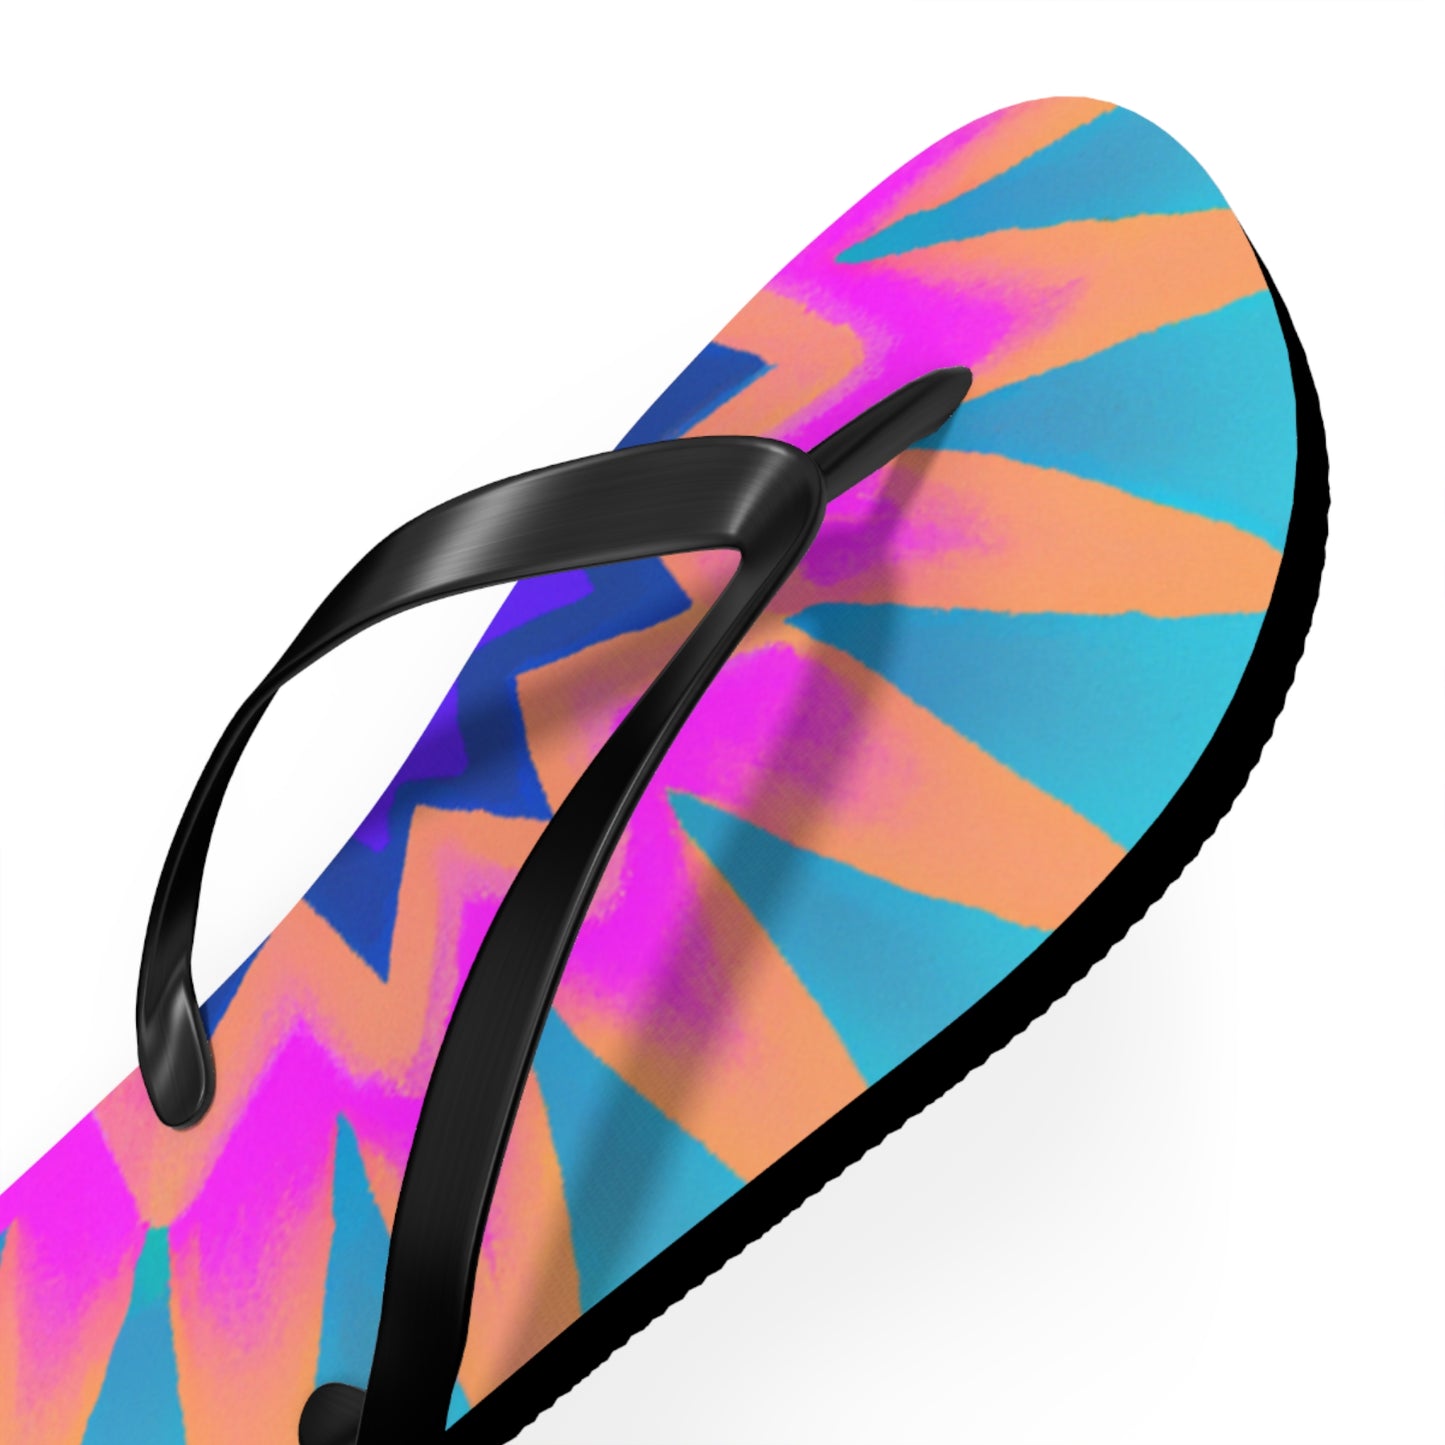 Horatio Bootwood - Psychedelic Trippy Flip Flop Beach Sandals